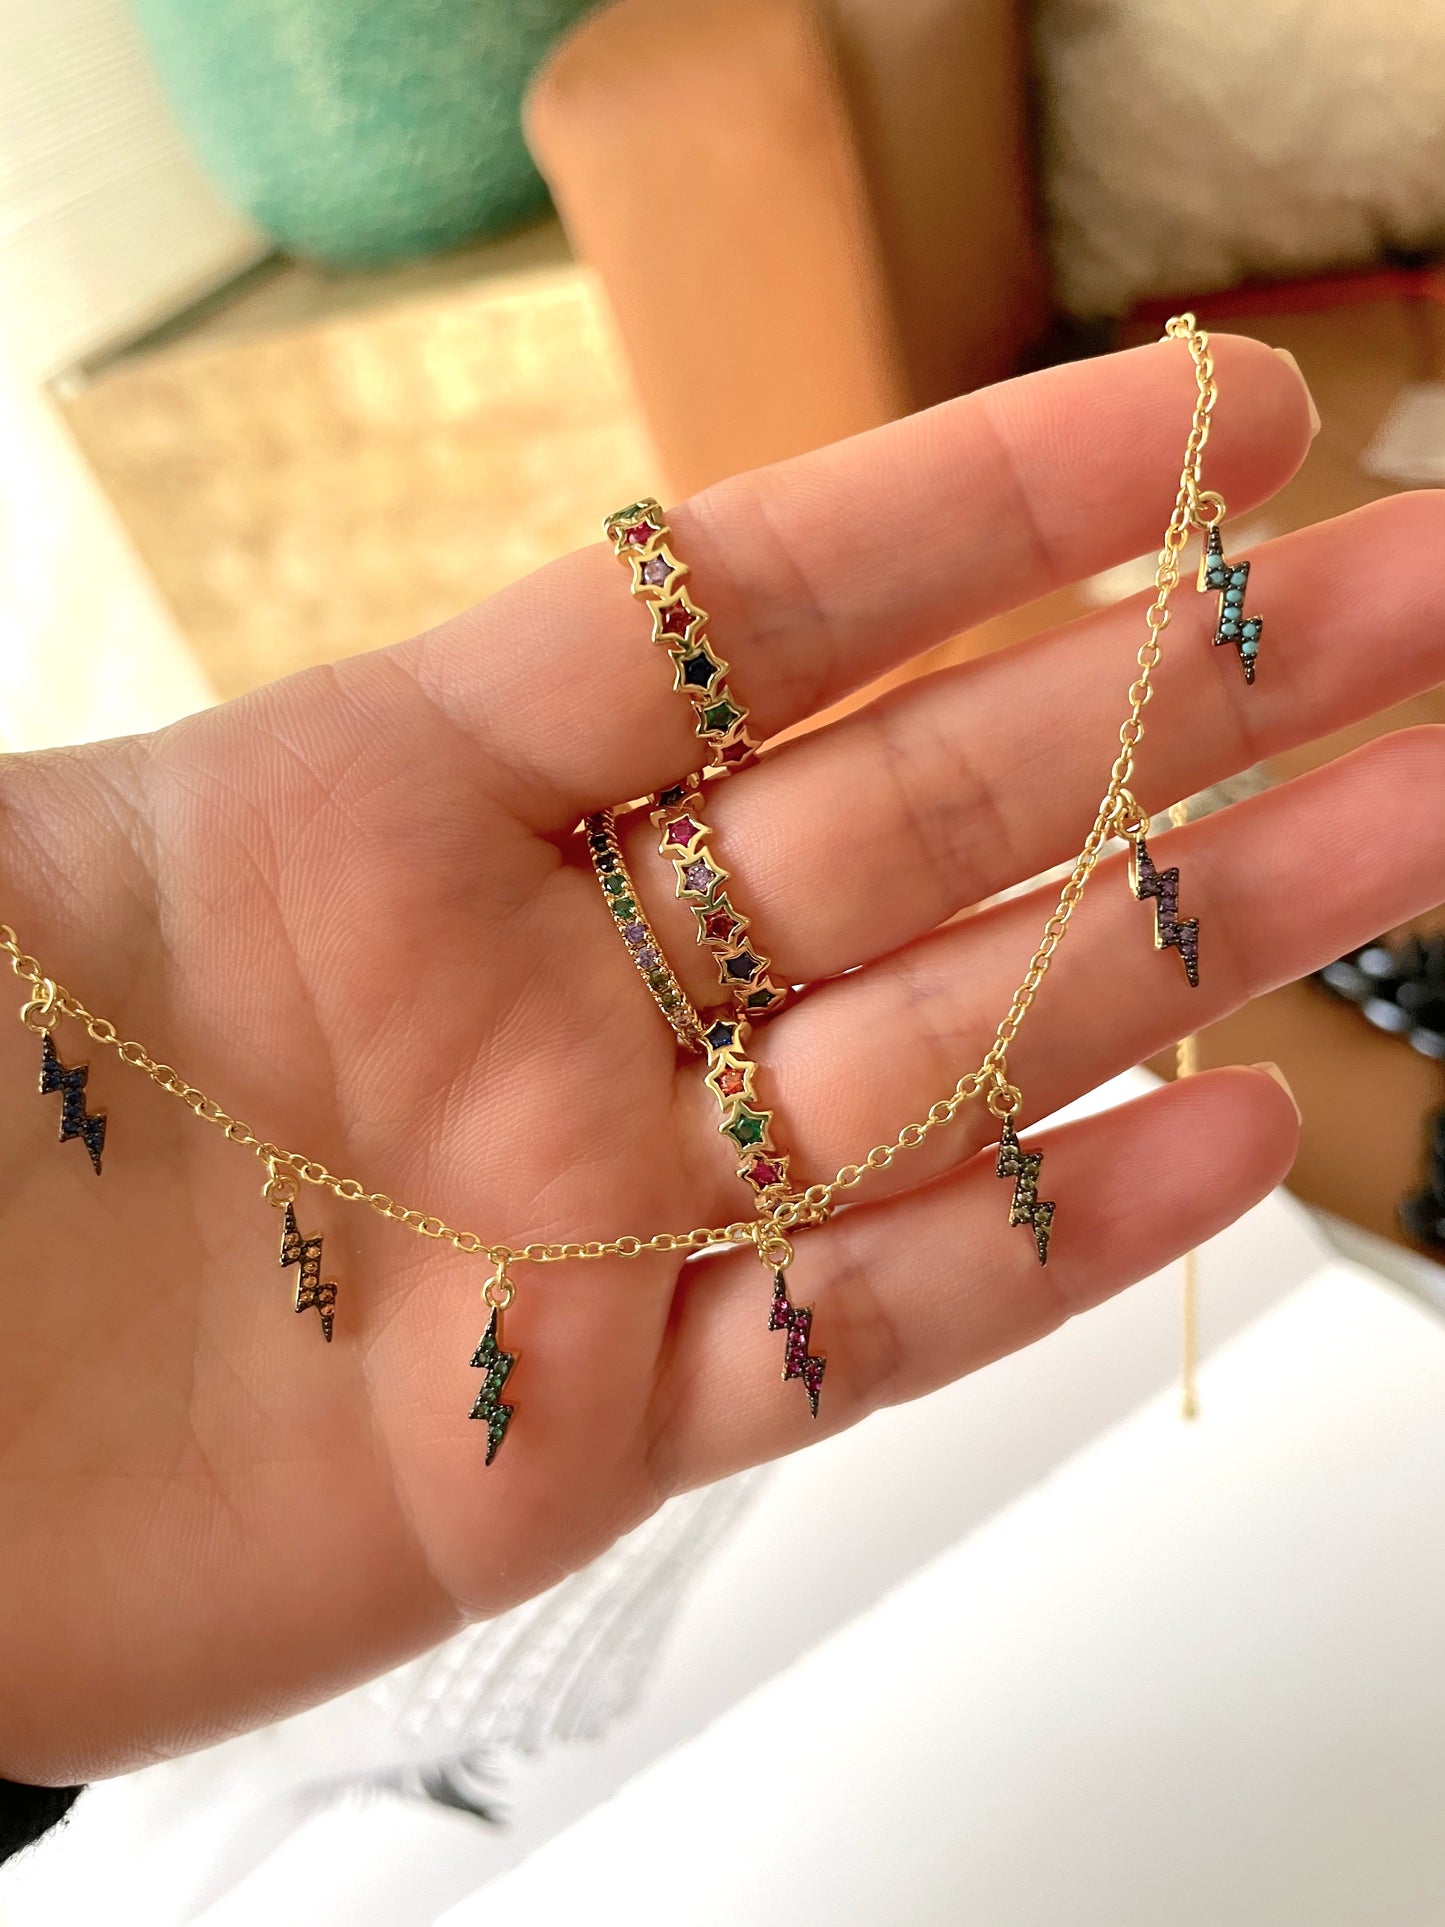 Colored lightning necklace